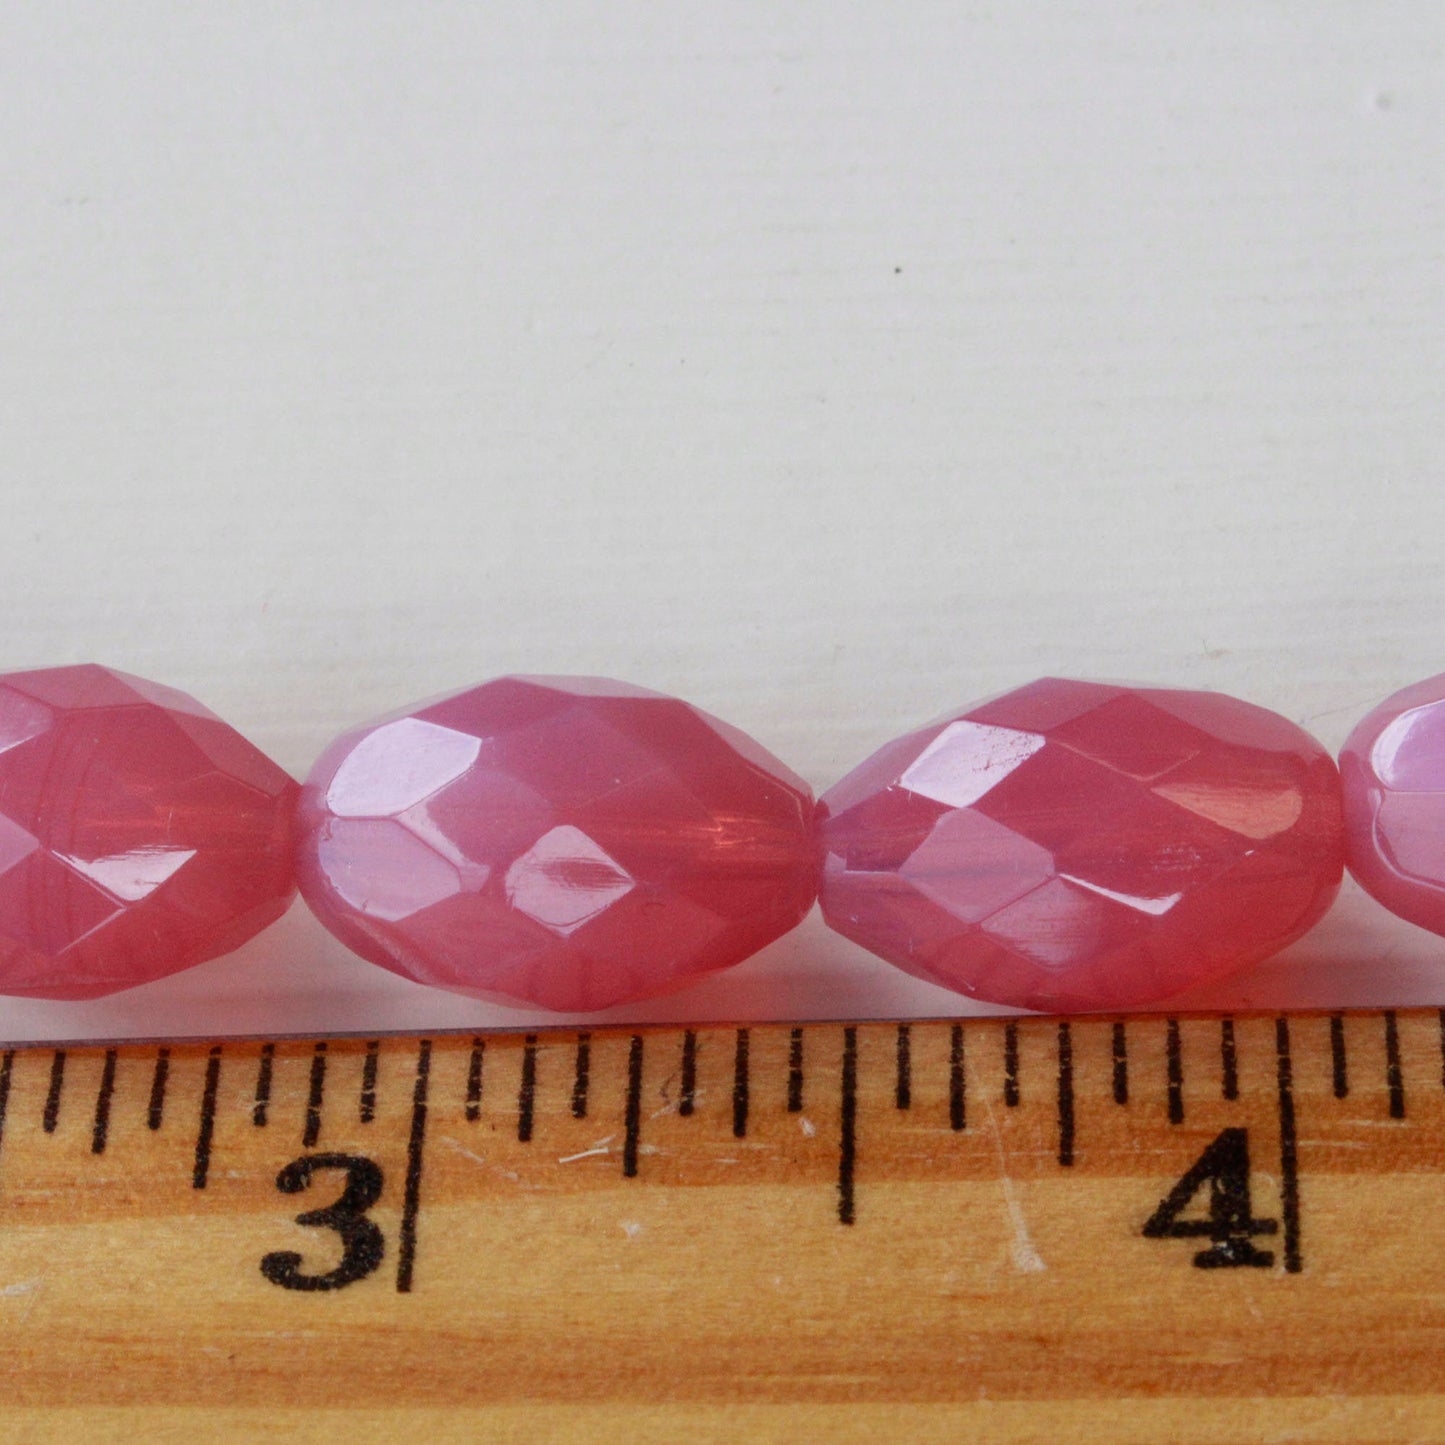 Load image into Gallery viewer, 10x15mm Firepolished Glass Oval Beads - Pink Opaline - 4 Beads
